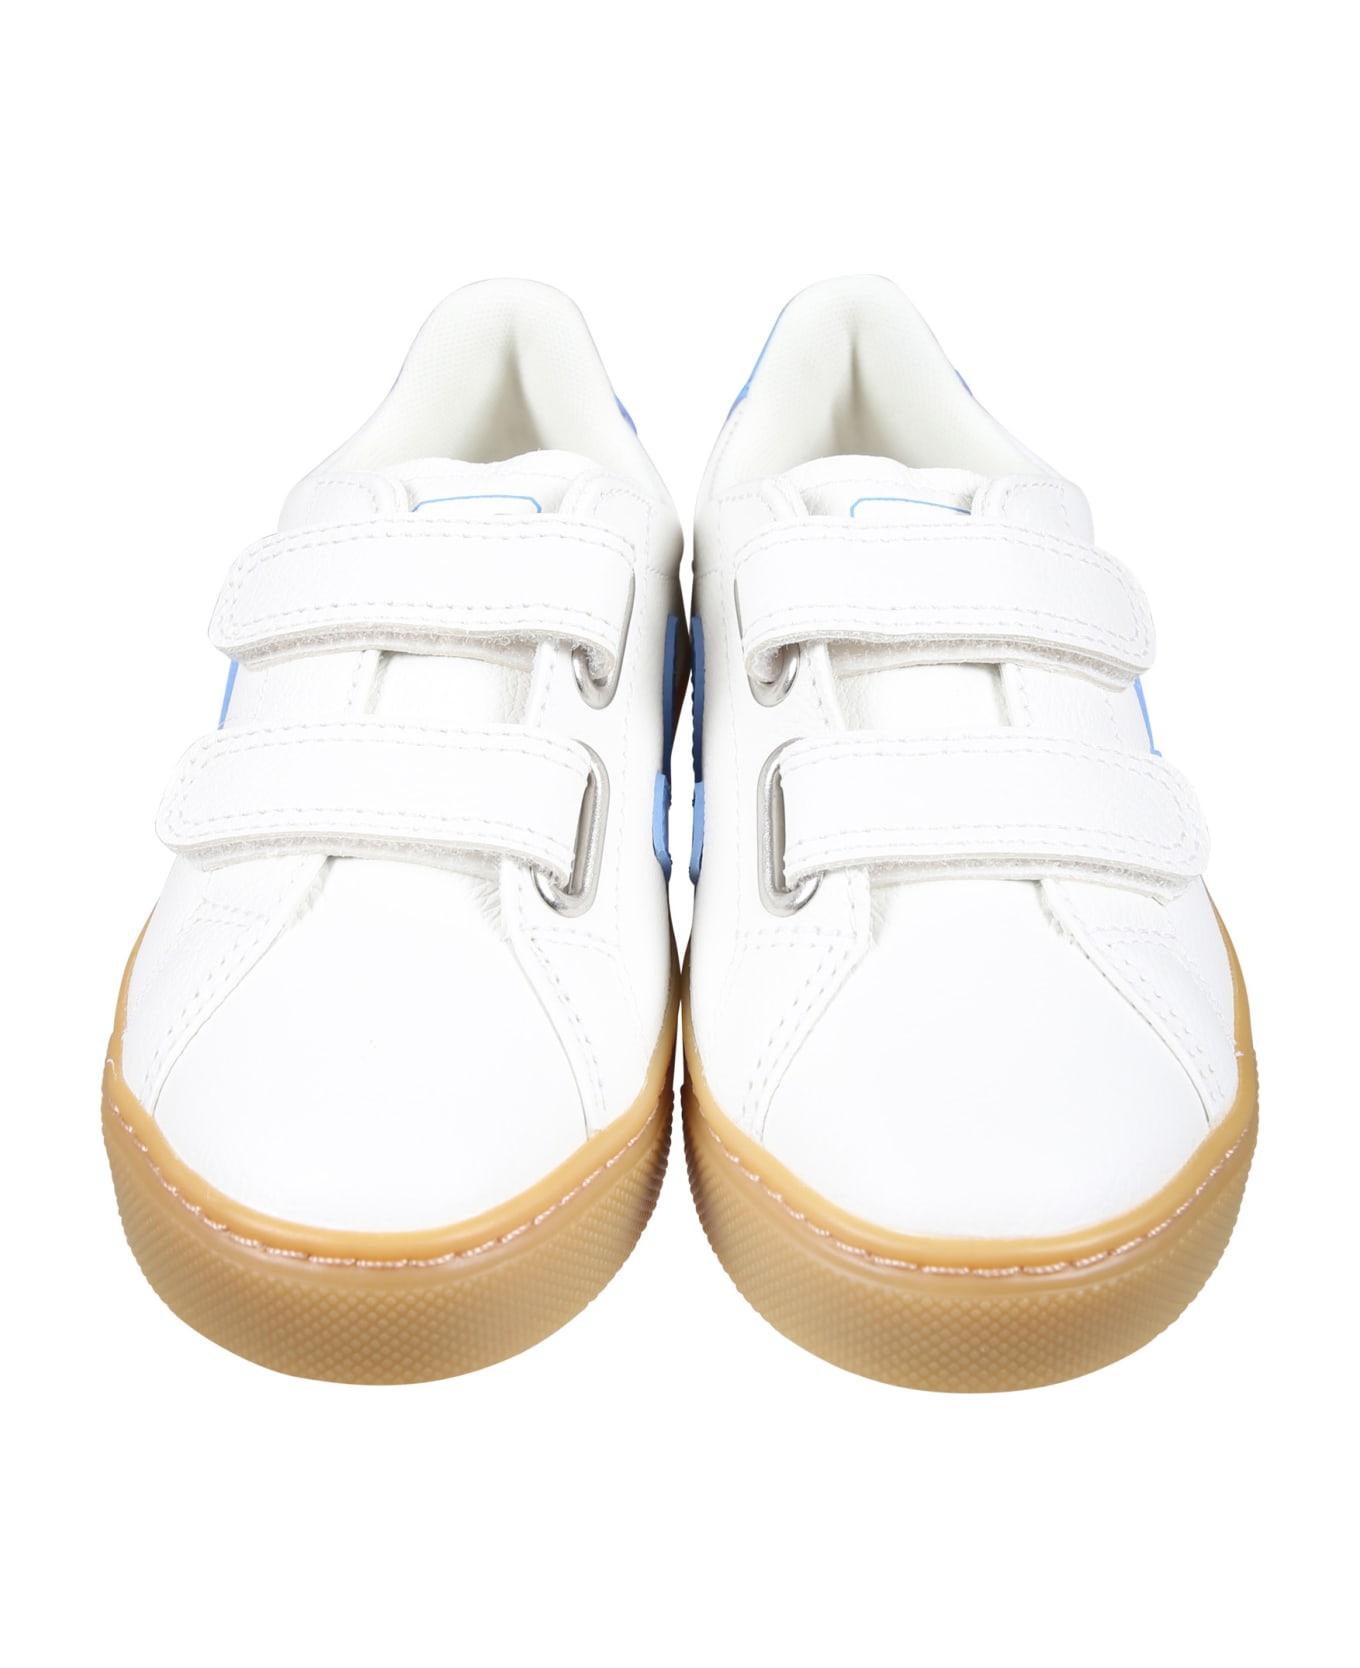 Veja White Sneakers For Kids With Logo - White